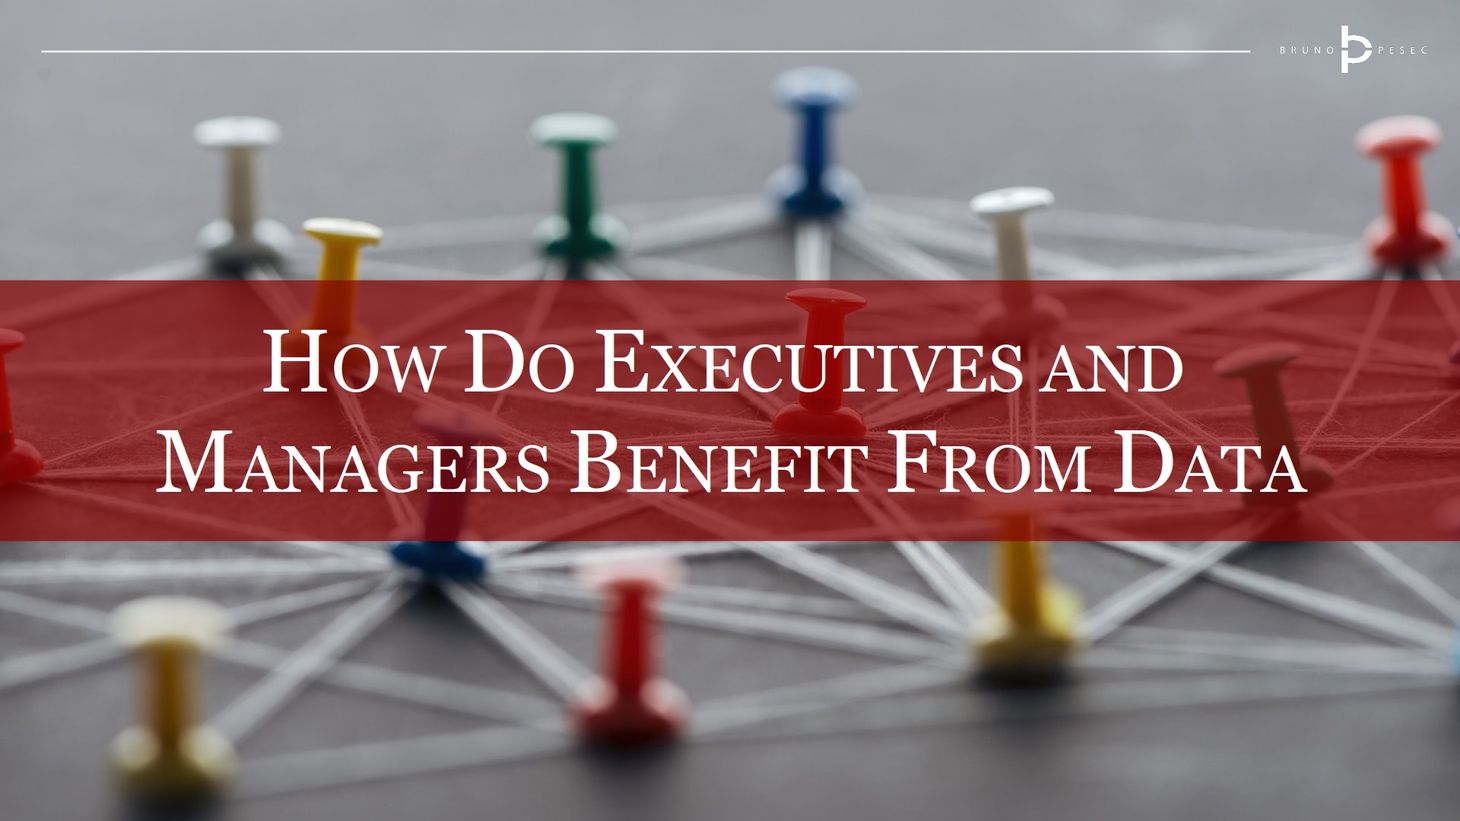 How do executives and managers benefit from data